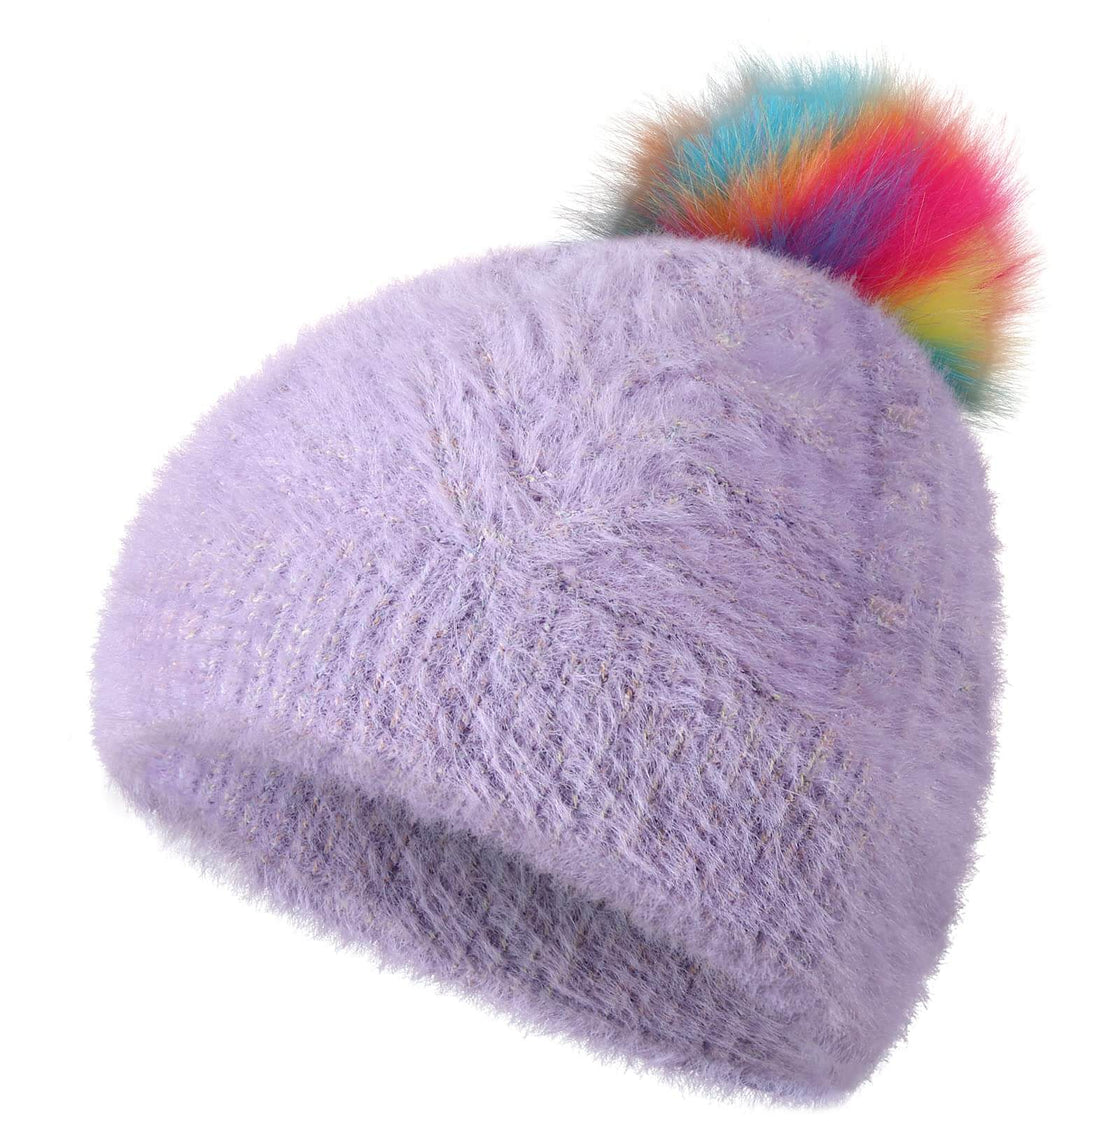 Cute WHITE Beanie Two White Pom Poms Hat Women Knit Beanie Warm Pompom Hat  for Girl Teenager Wool Knit Hat One Size 